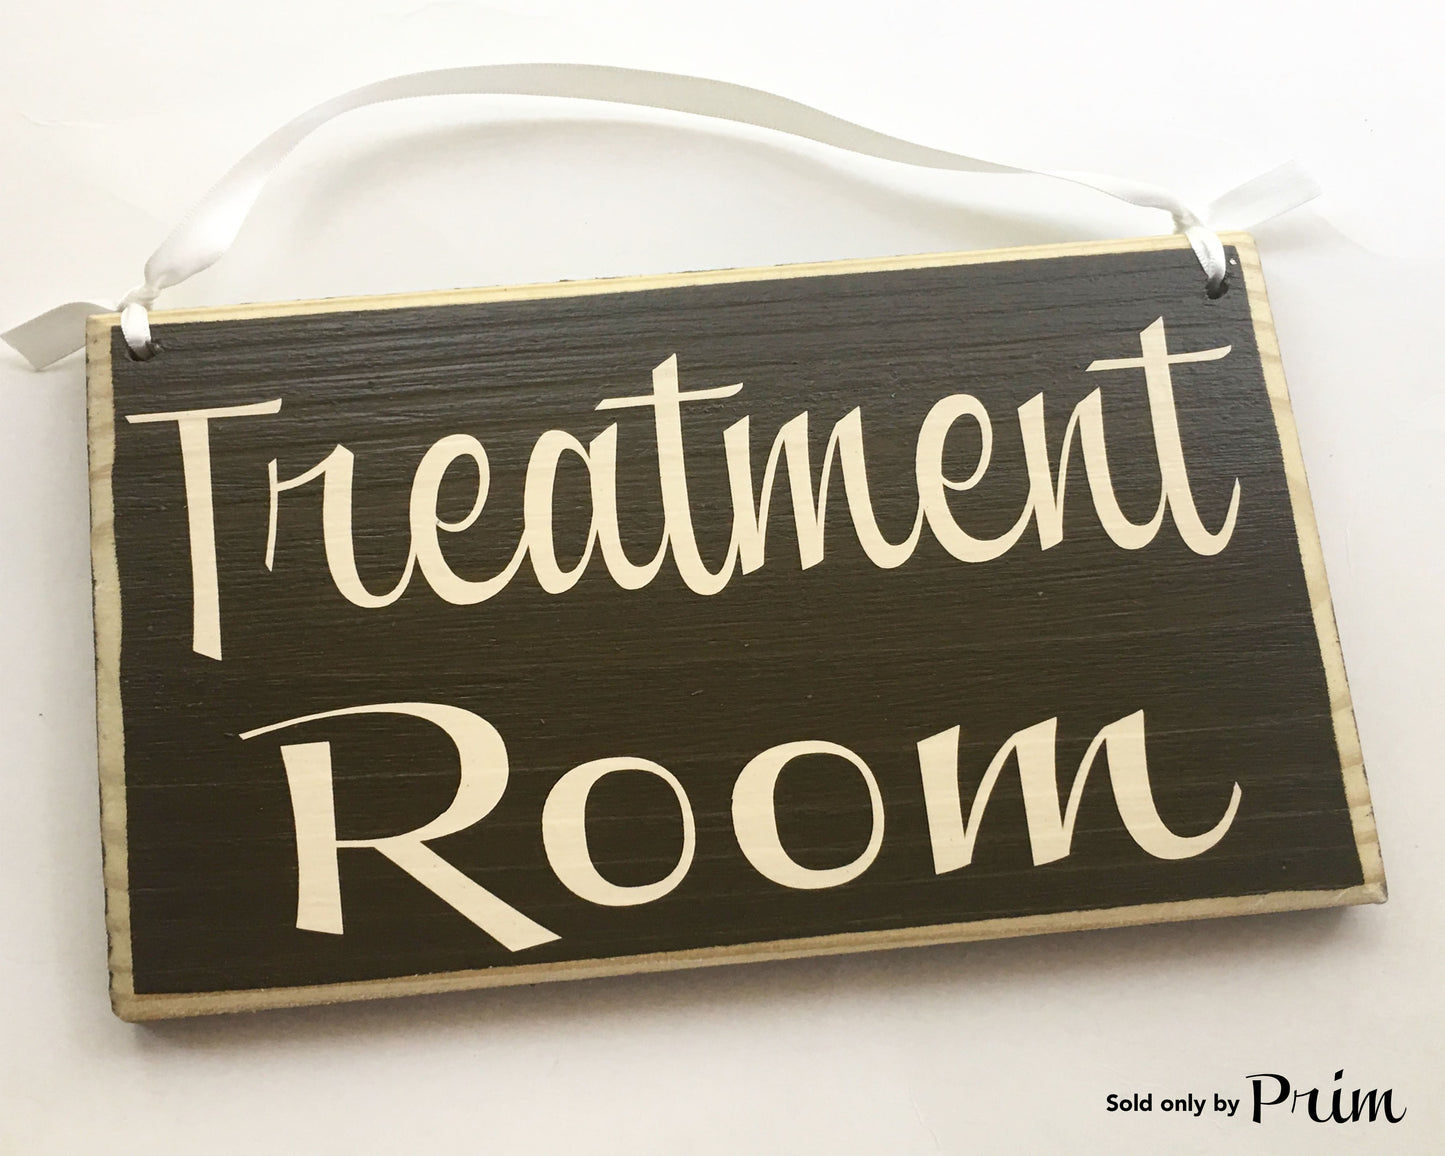 8x6 Treatment Room Spa Massage Relaxation Wood Sign